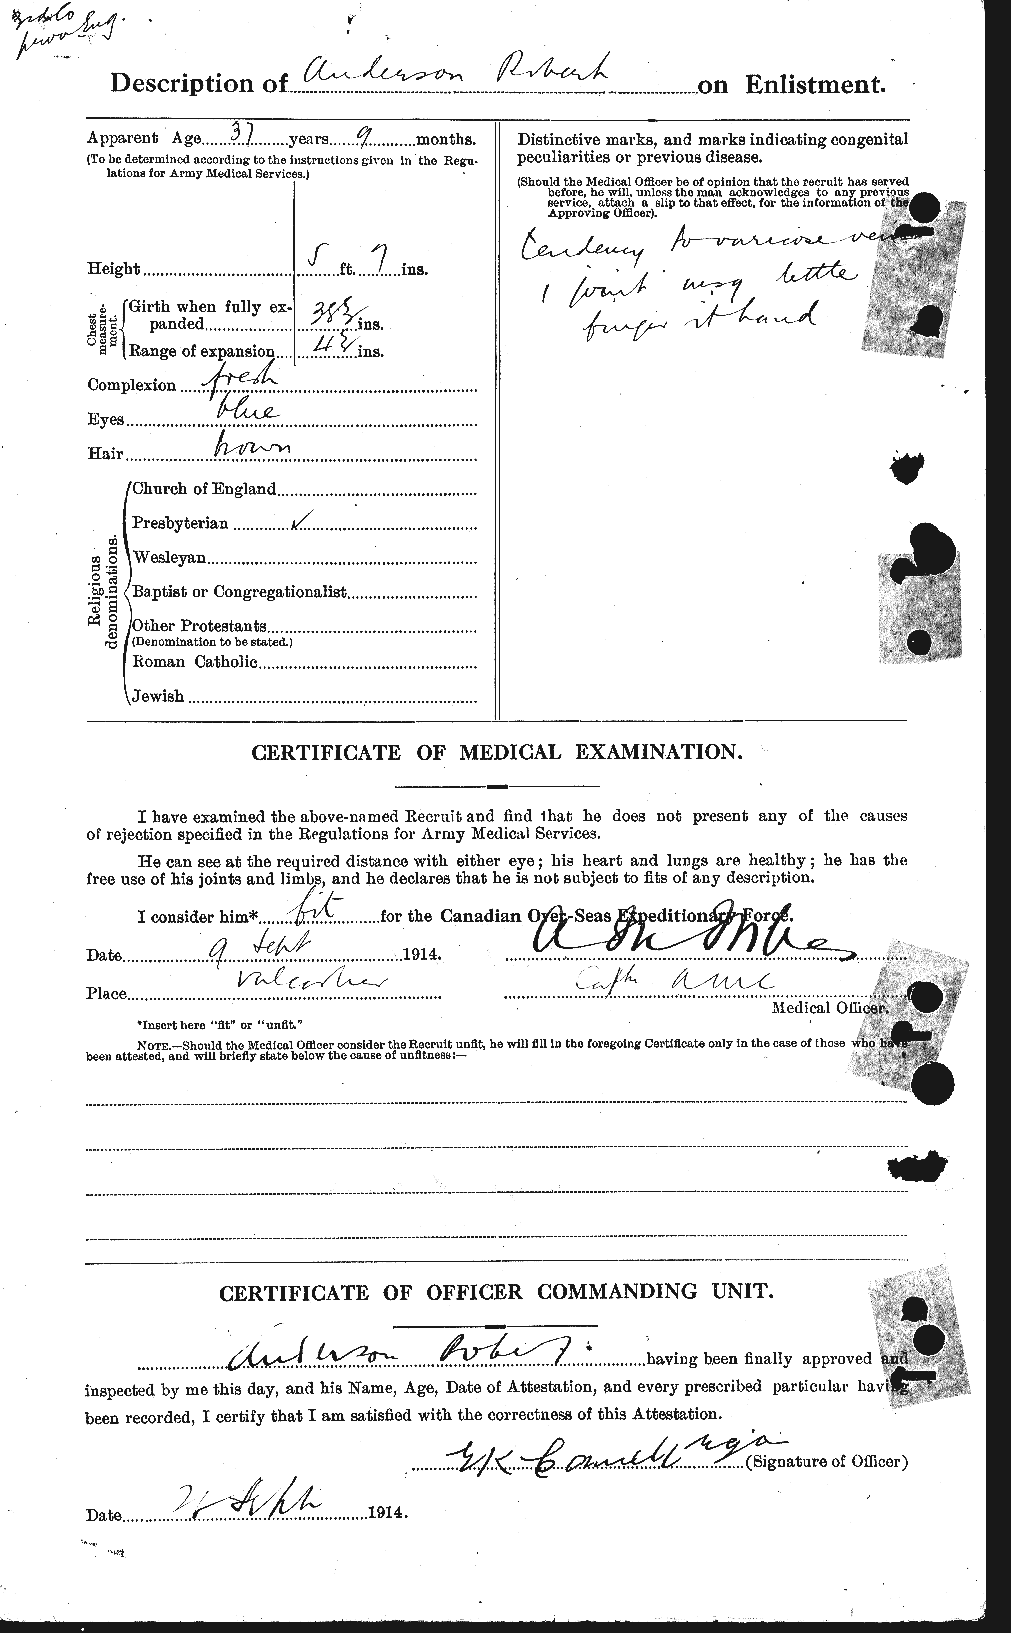 Personnel Records of the First World War - CEF 207309b